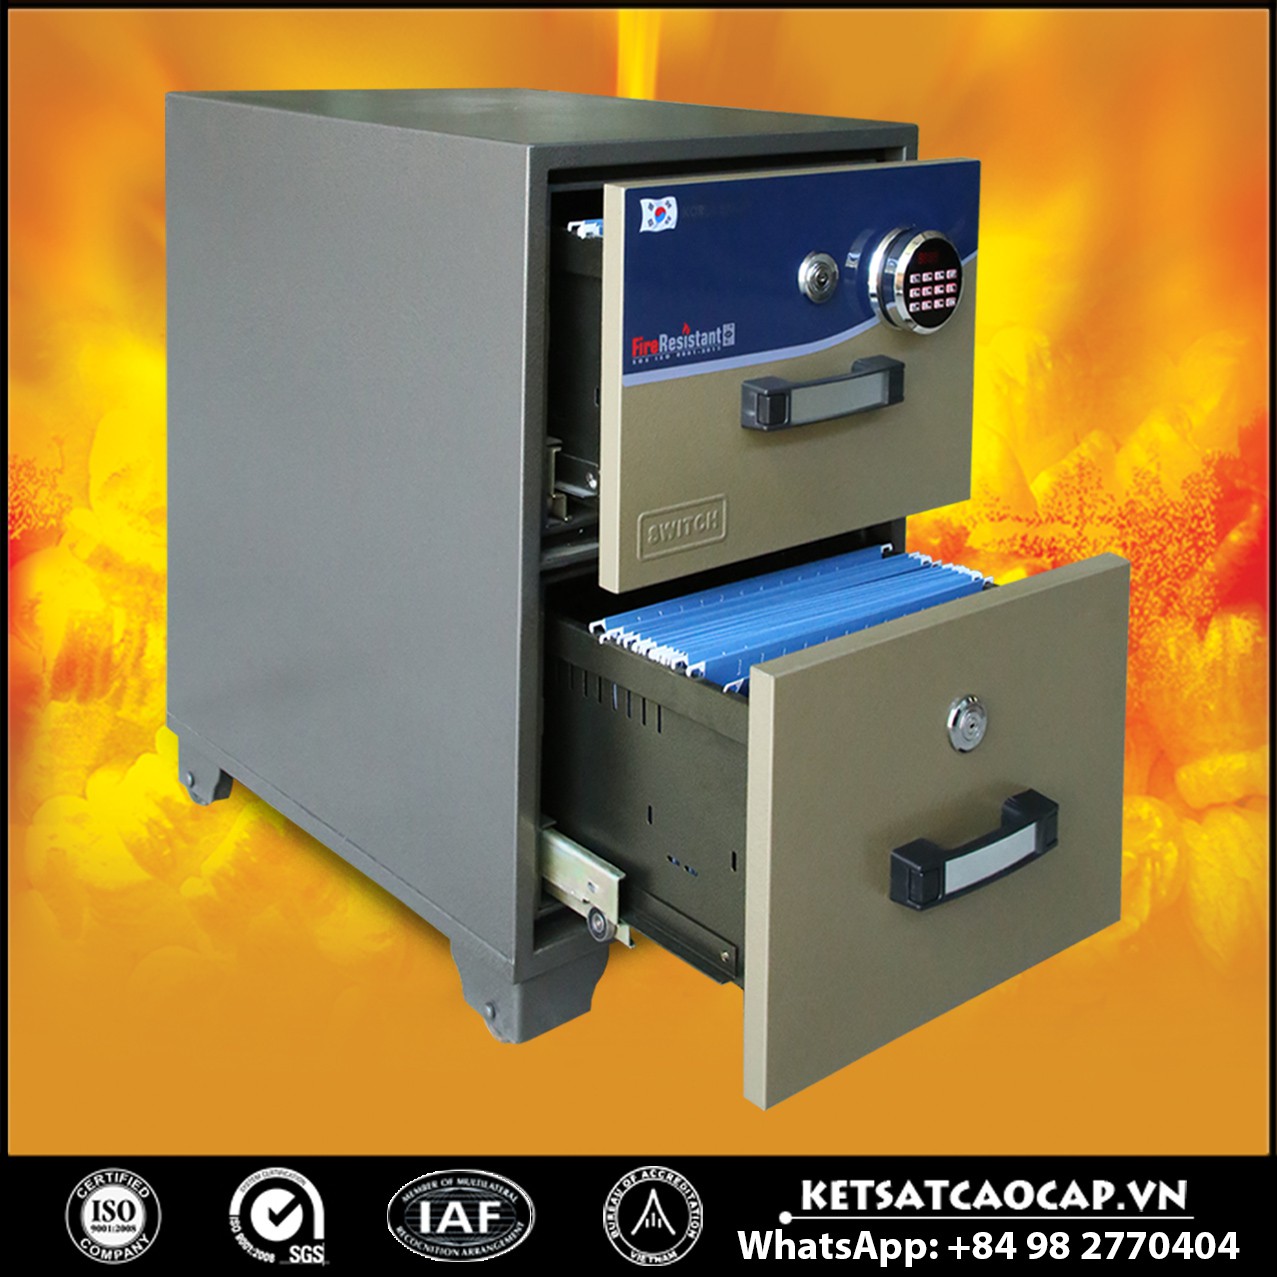 Fireproof fire safes filing cabinets